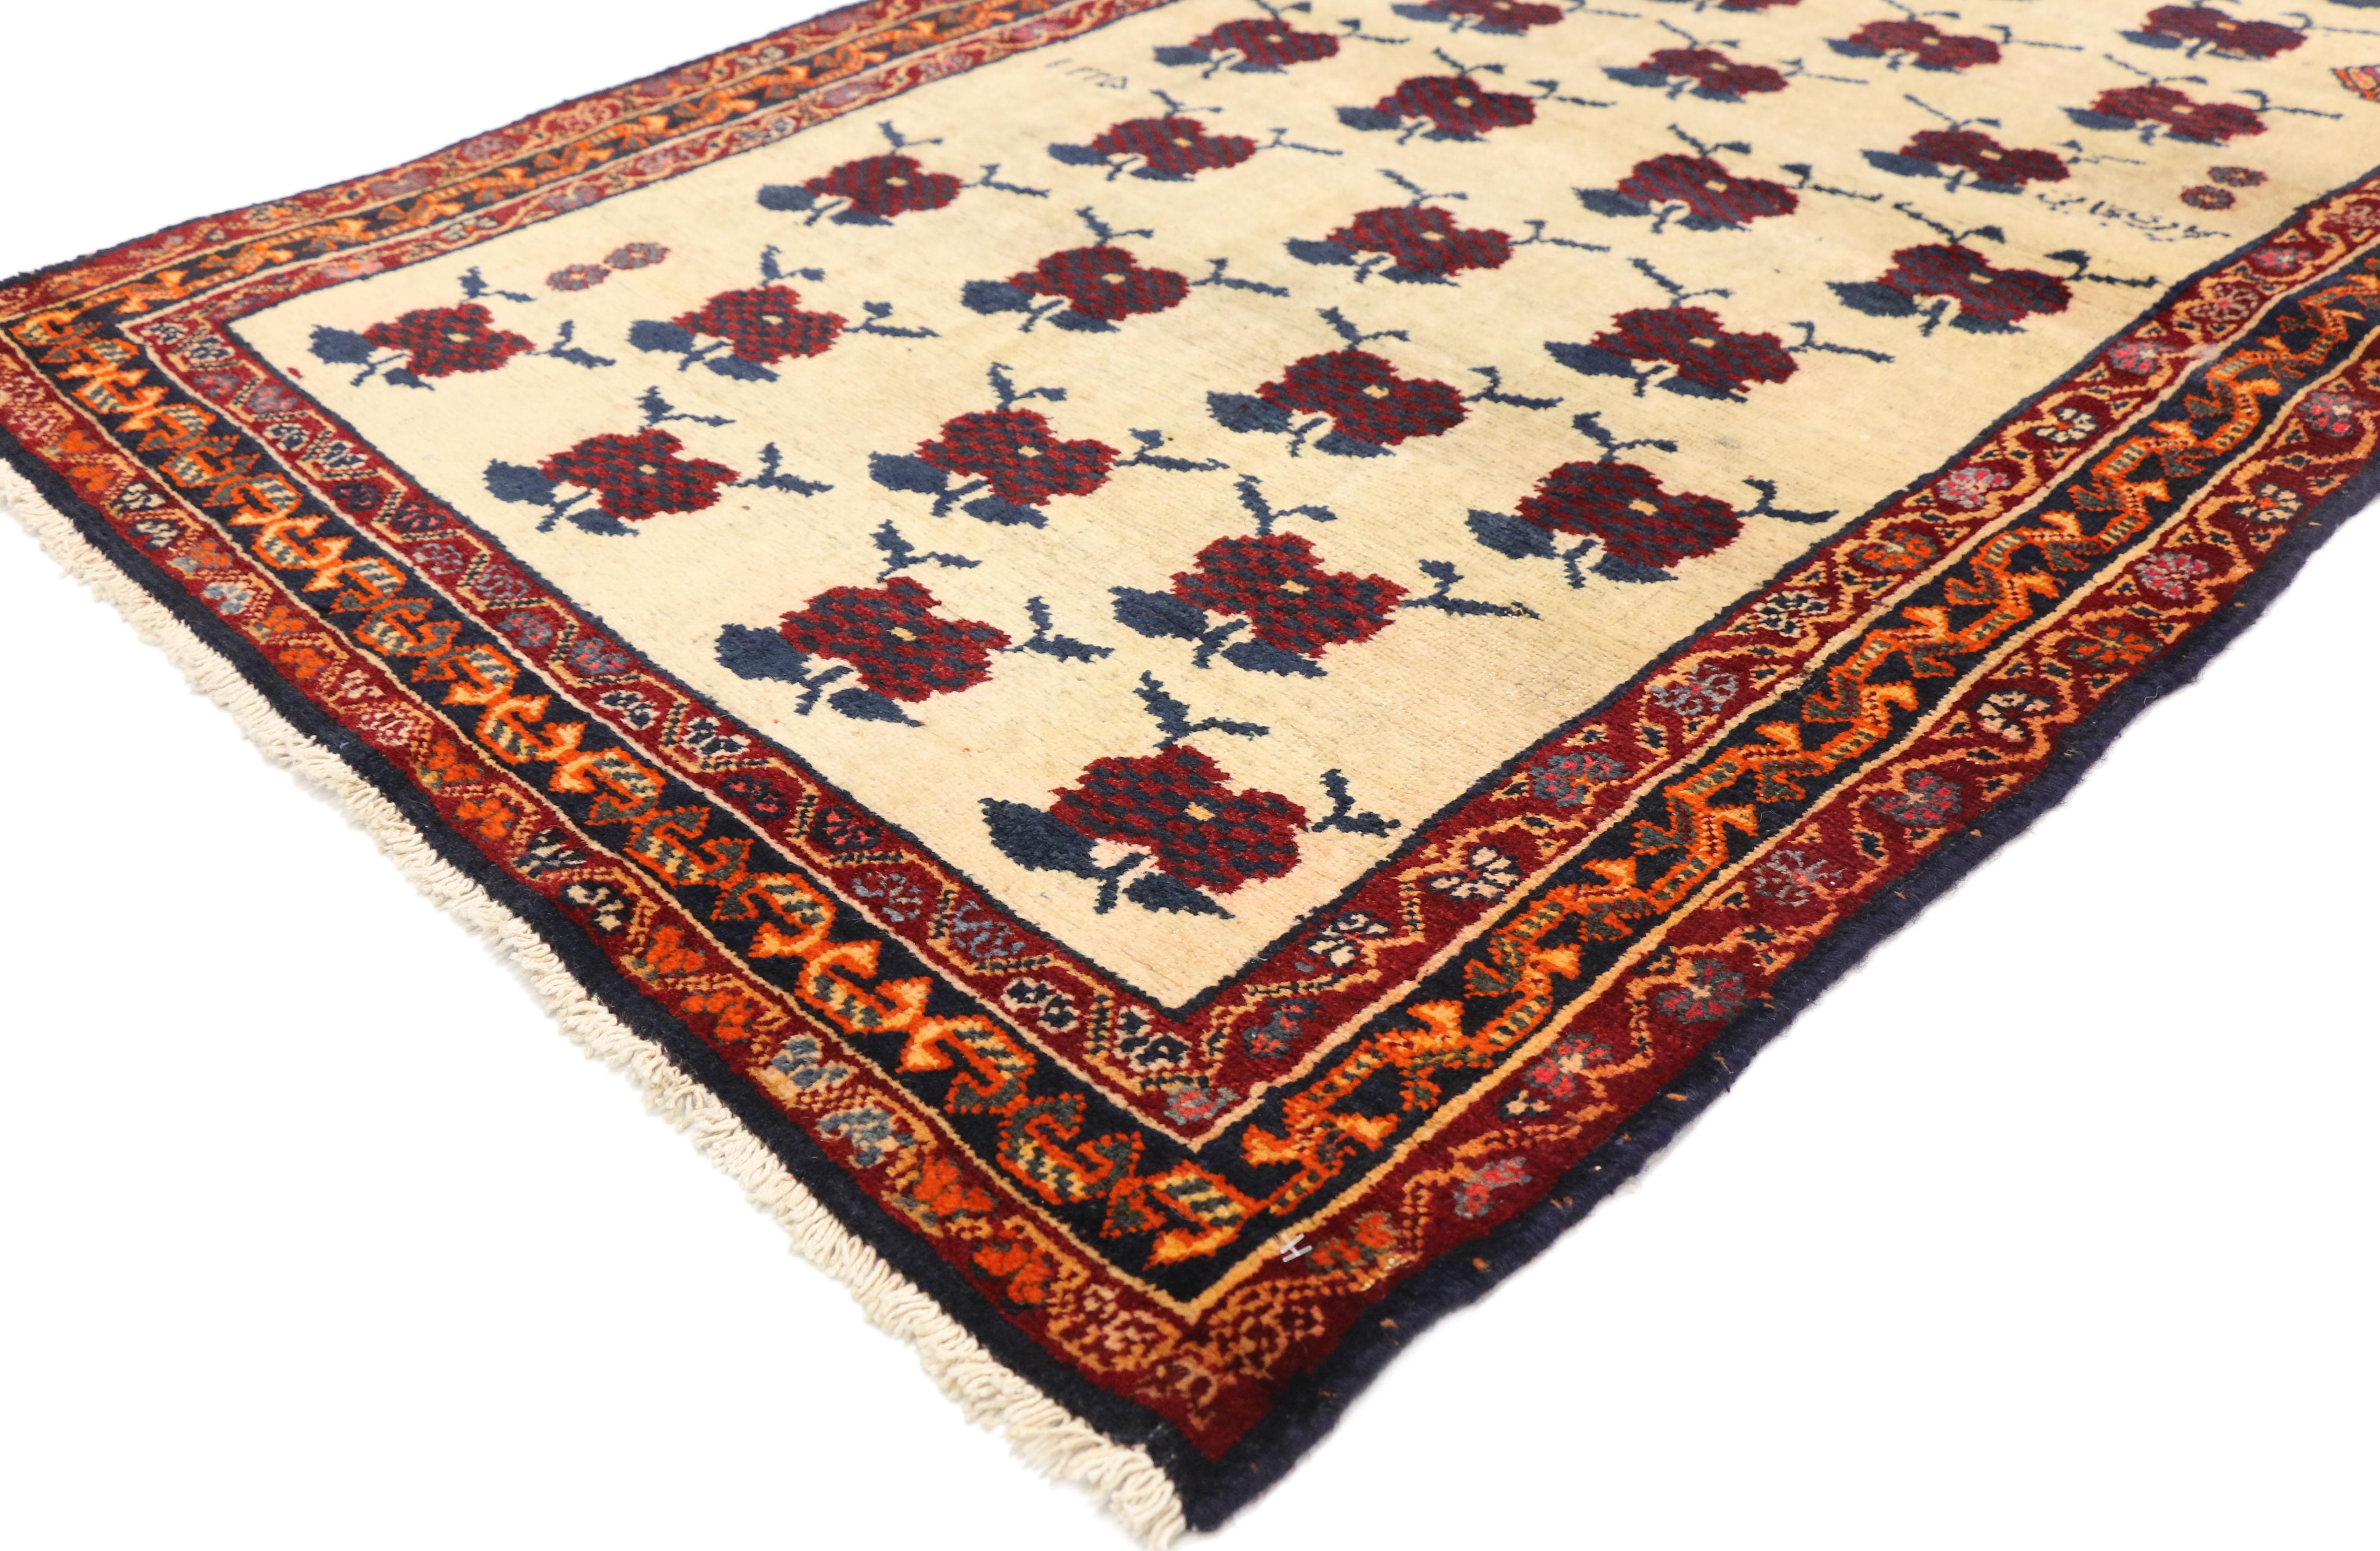 75887, vintage Persian Shiraz Accent rug with Romantic Art Deco style. This hand knotted wool vintage Persian Shiraz accent rug features an all-over abstract floral pattern dotted with a deer and weaver's signature. The vintage Shiraz rug is